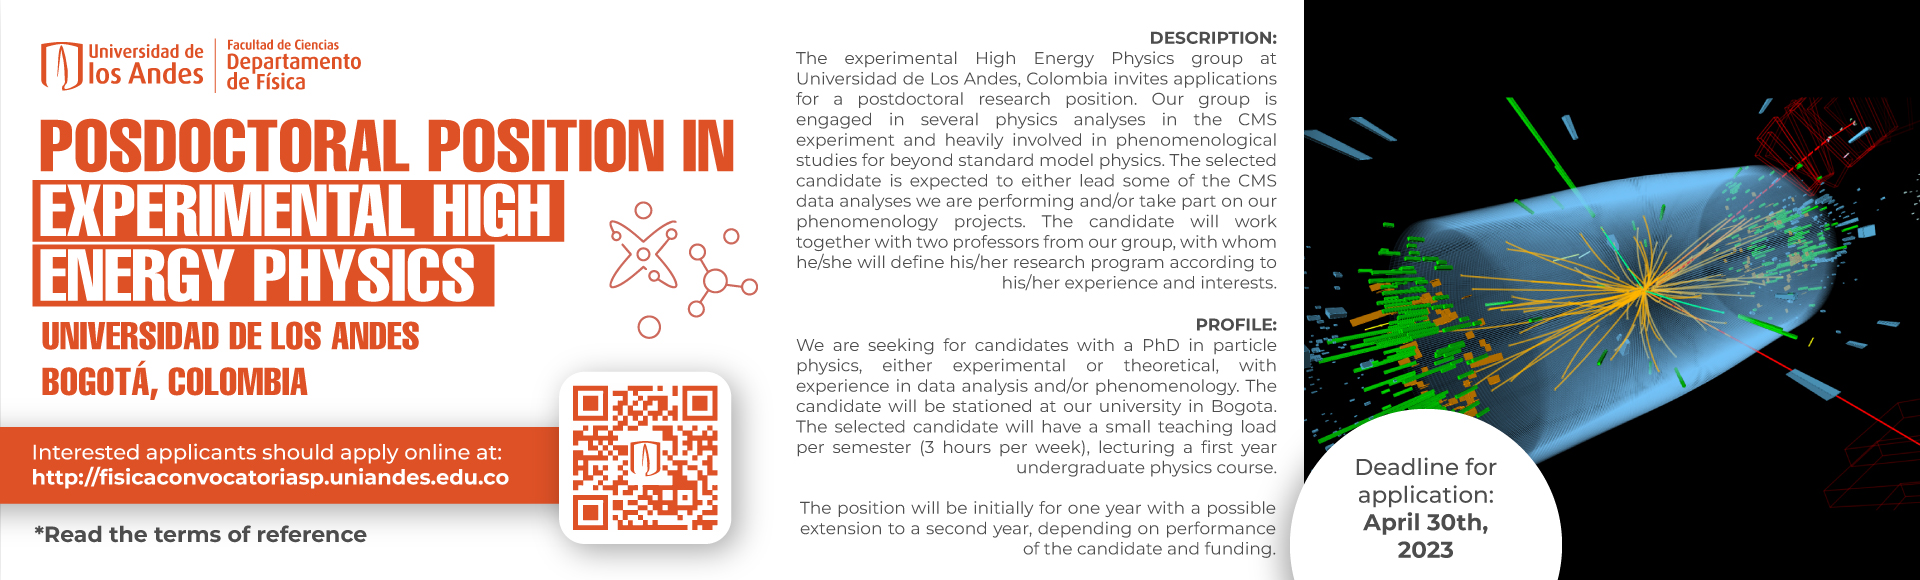 Postdoctoral position in experimental high energy physics